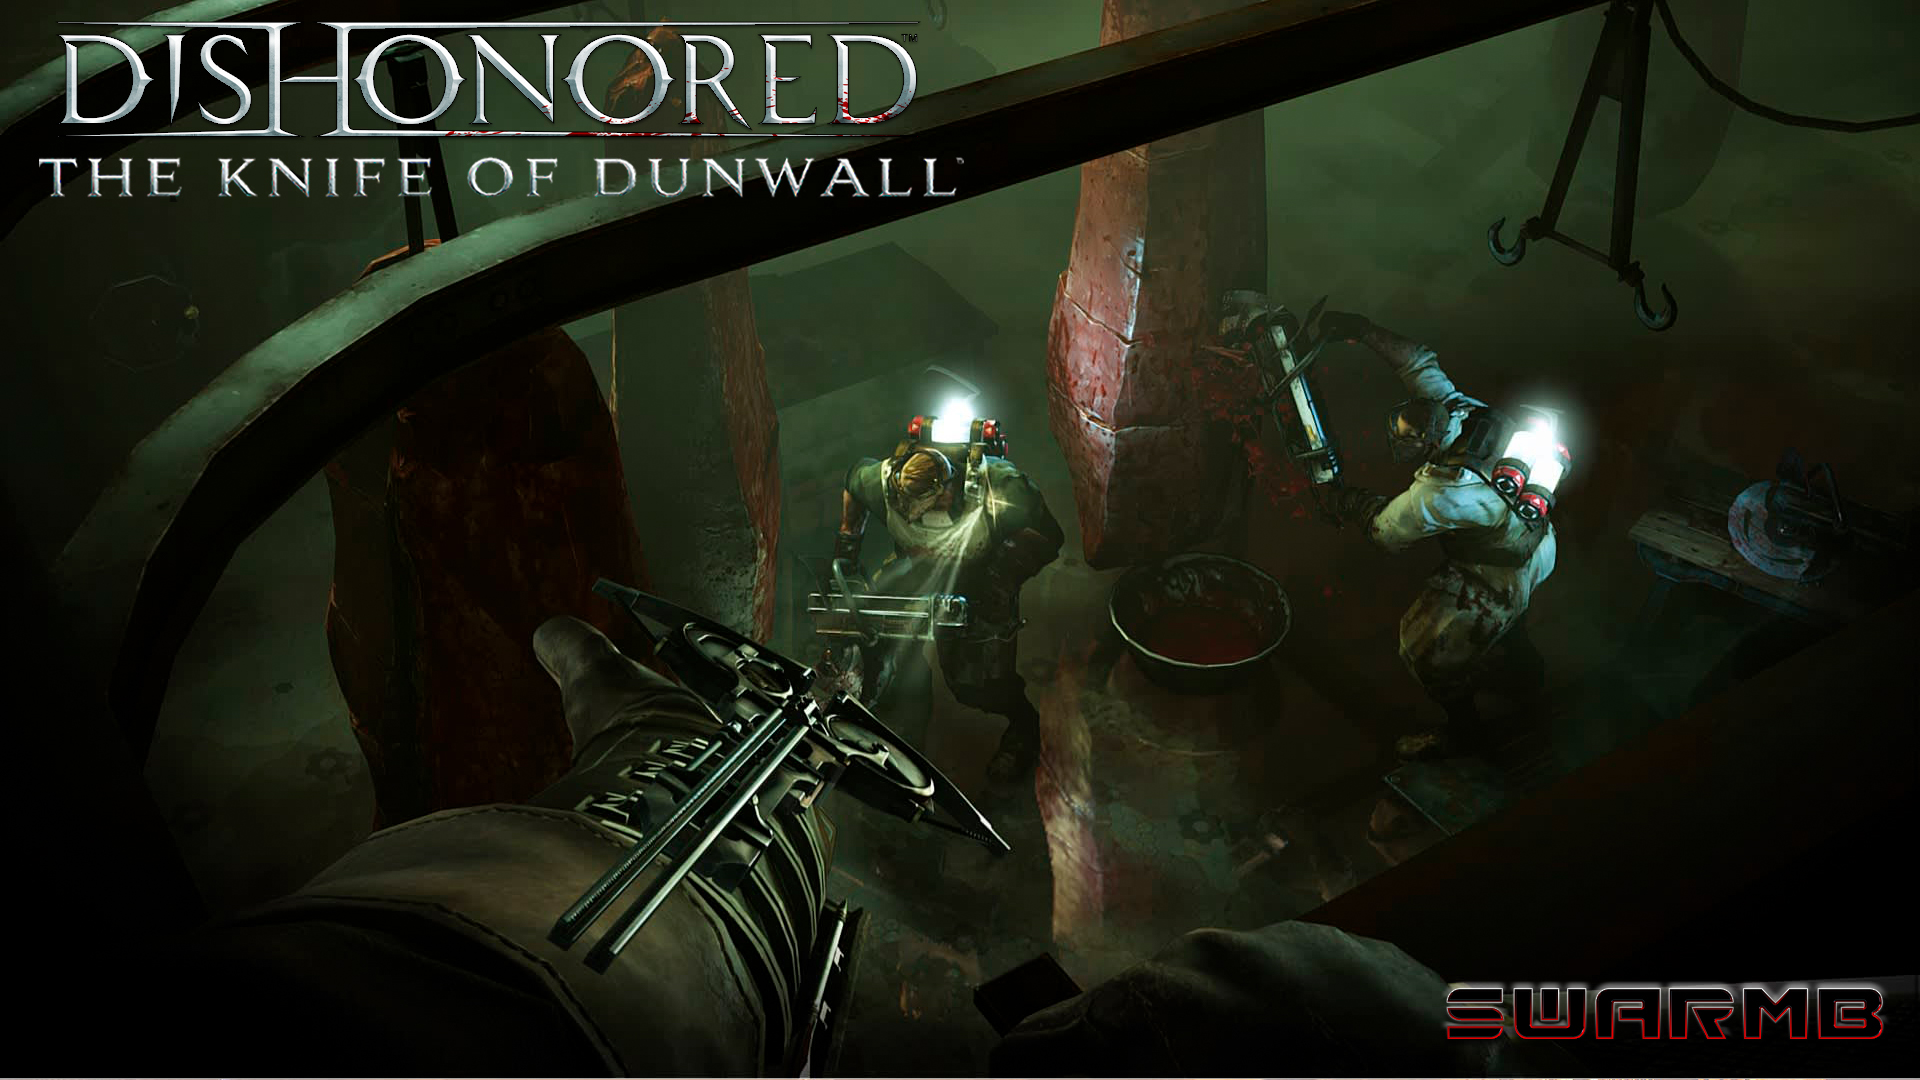 Dishonored - The Knife of Dunwall ➪ # 2) Далила |Ассасин-мастер|